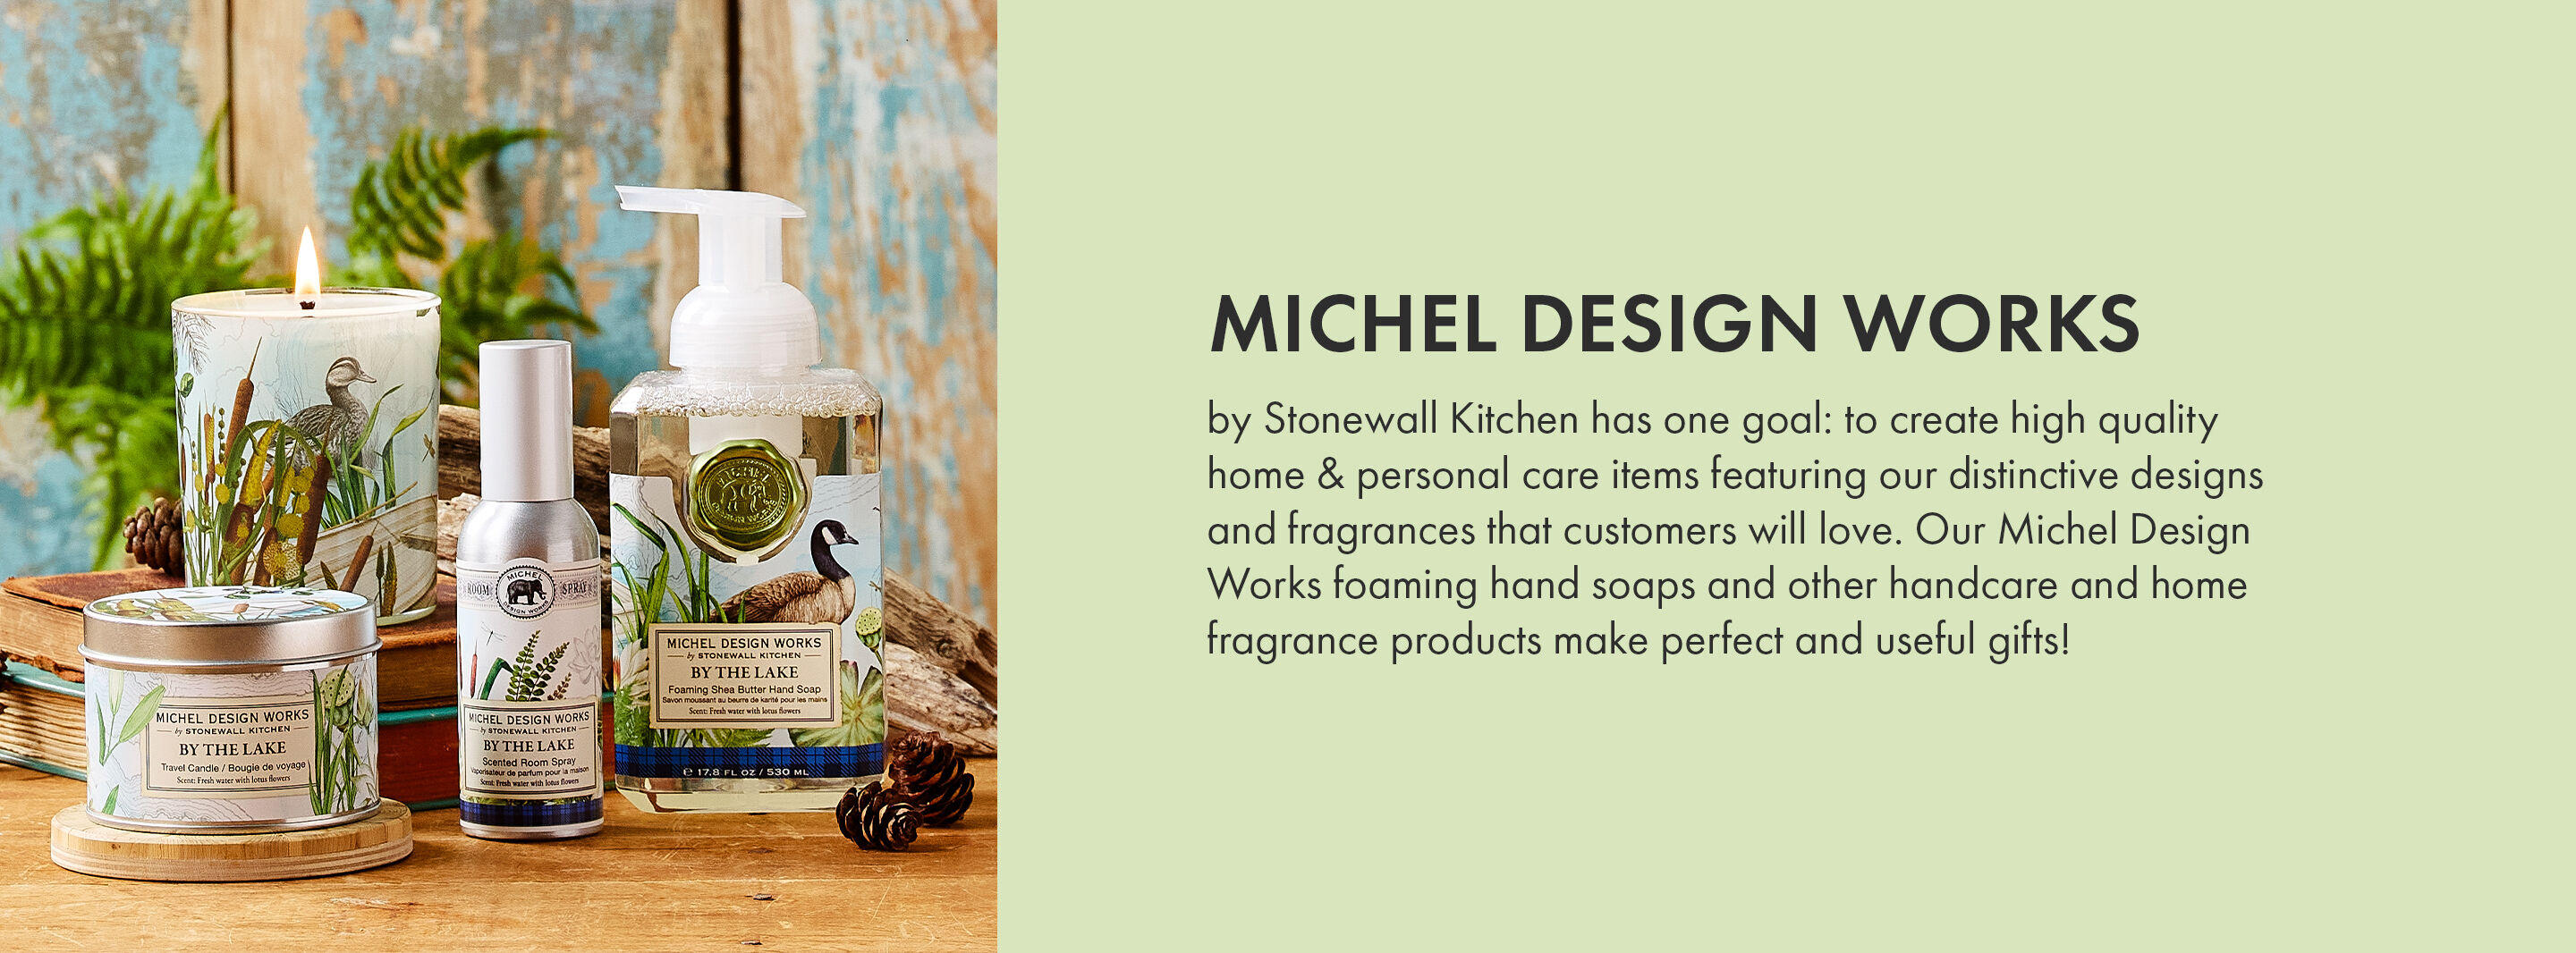 Michel Design Works by Stonewall Kitchen has one goal: to create high quality home & personal care items featuring our distinctive designs and fragrances that customers will love. Our Michel Design Works foaming hand soaps and other handcare and home fragrance products make perfect and useful gifts!